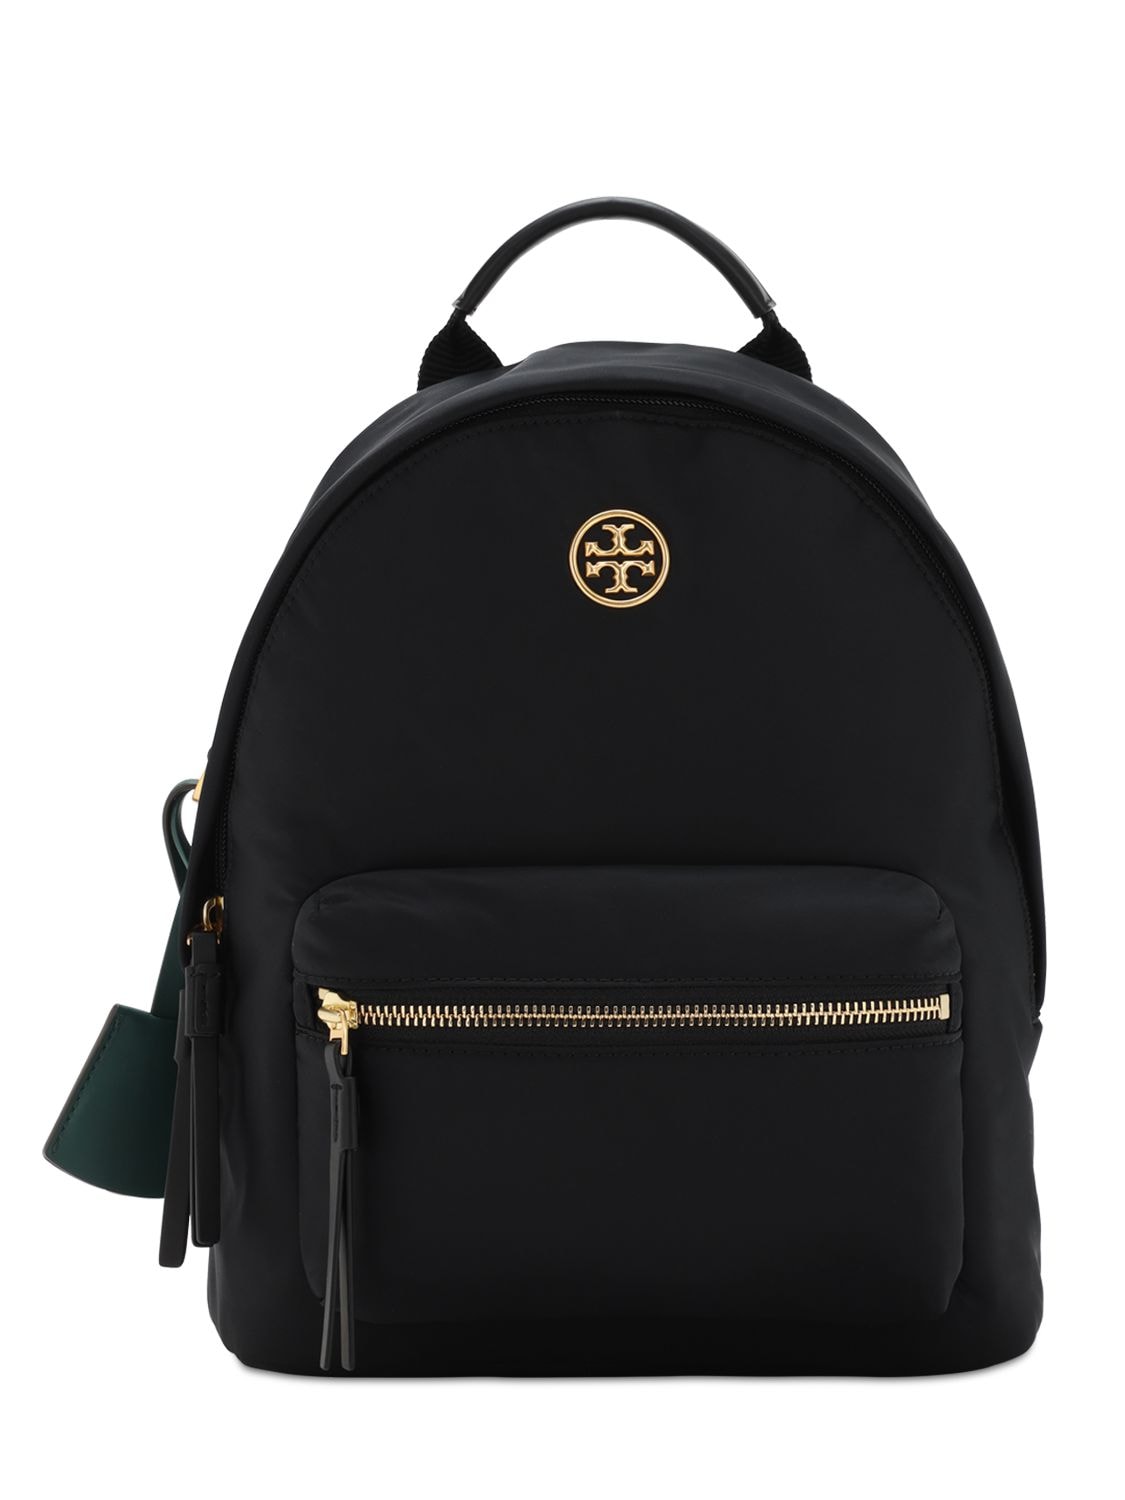 TORY BURCH Piper Small Nylon Zip Backpack for Women